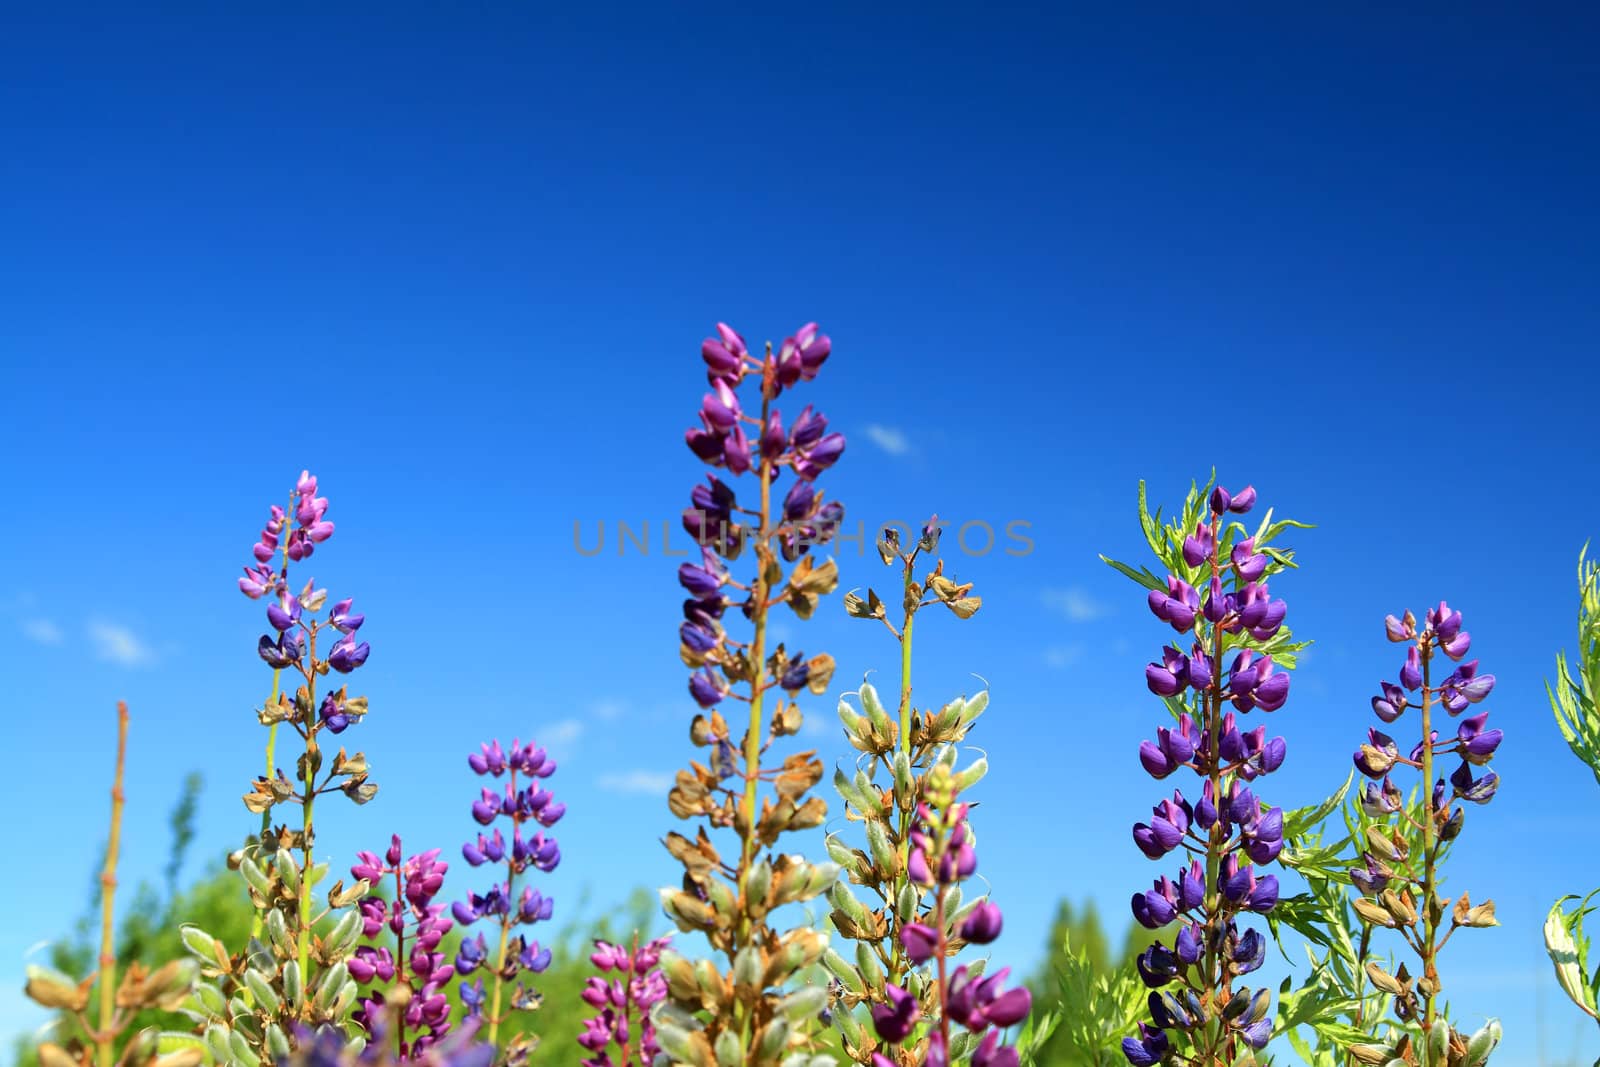 blue lupines on blue background by basel101658